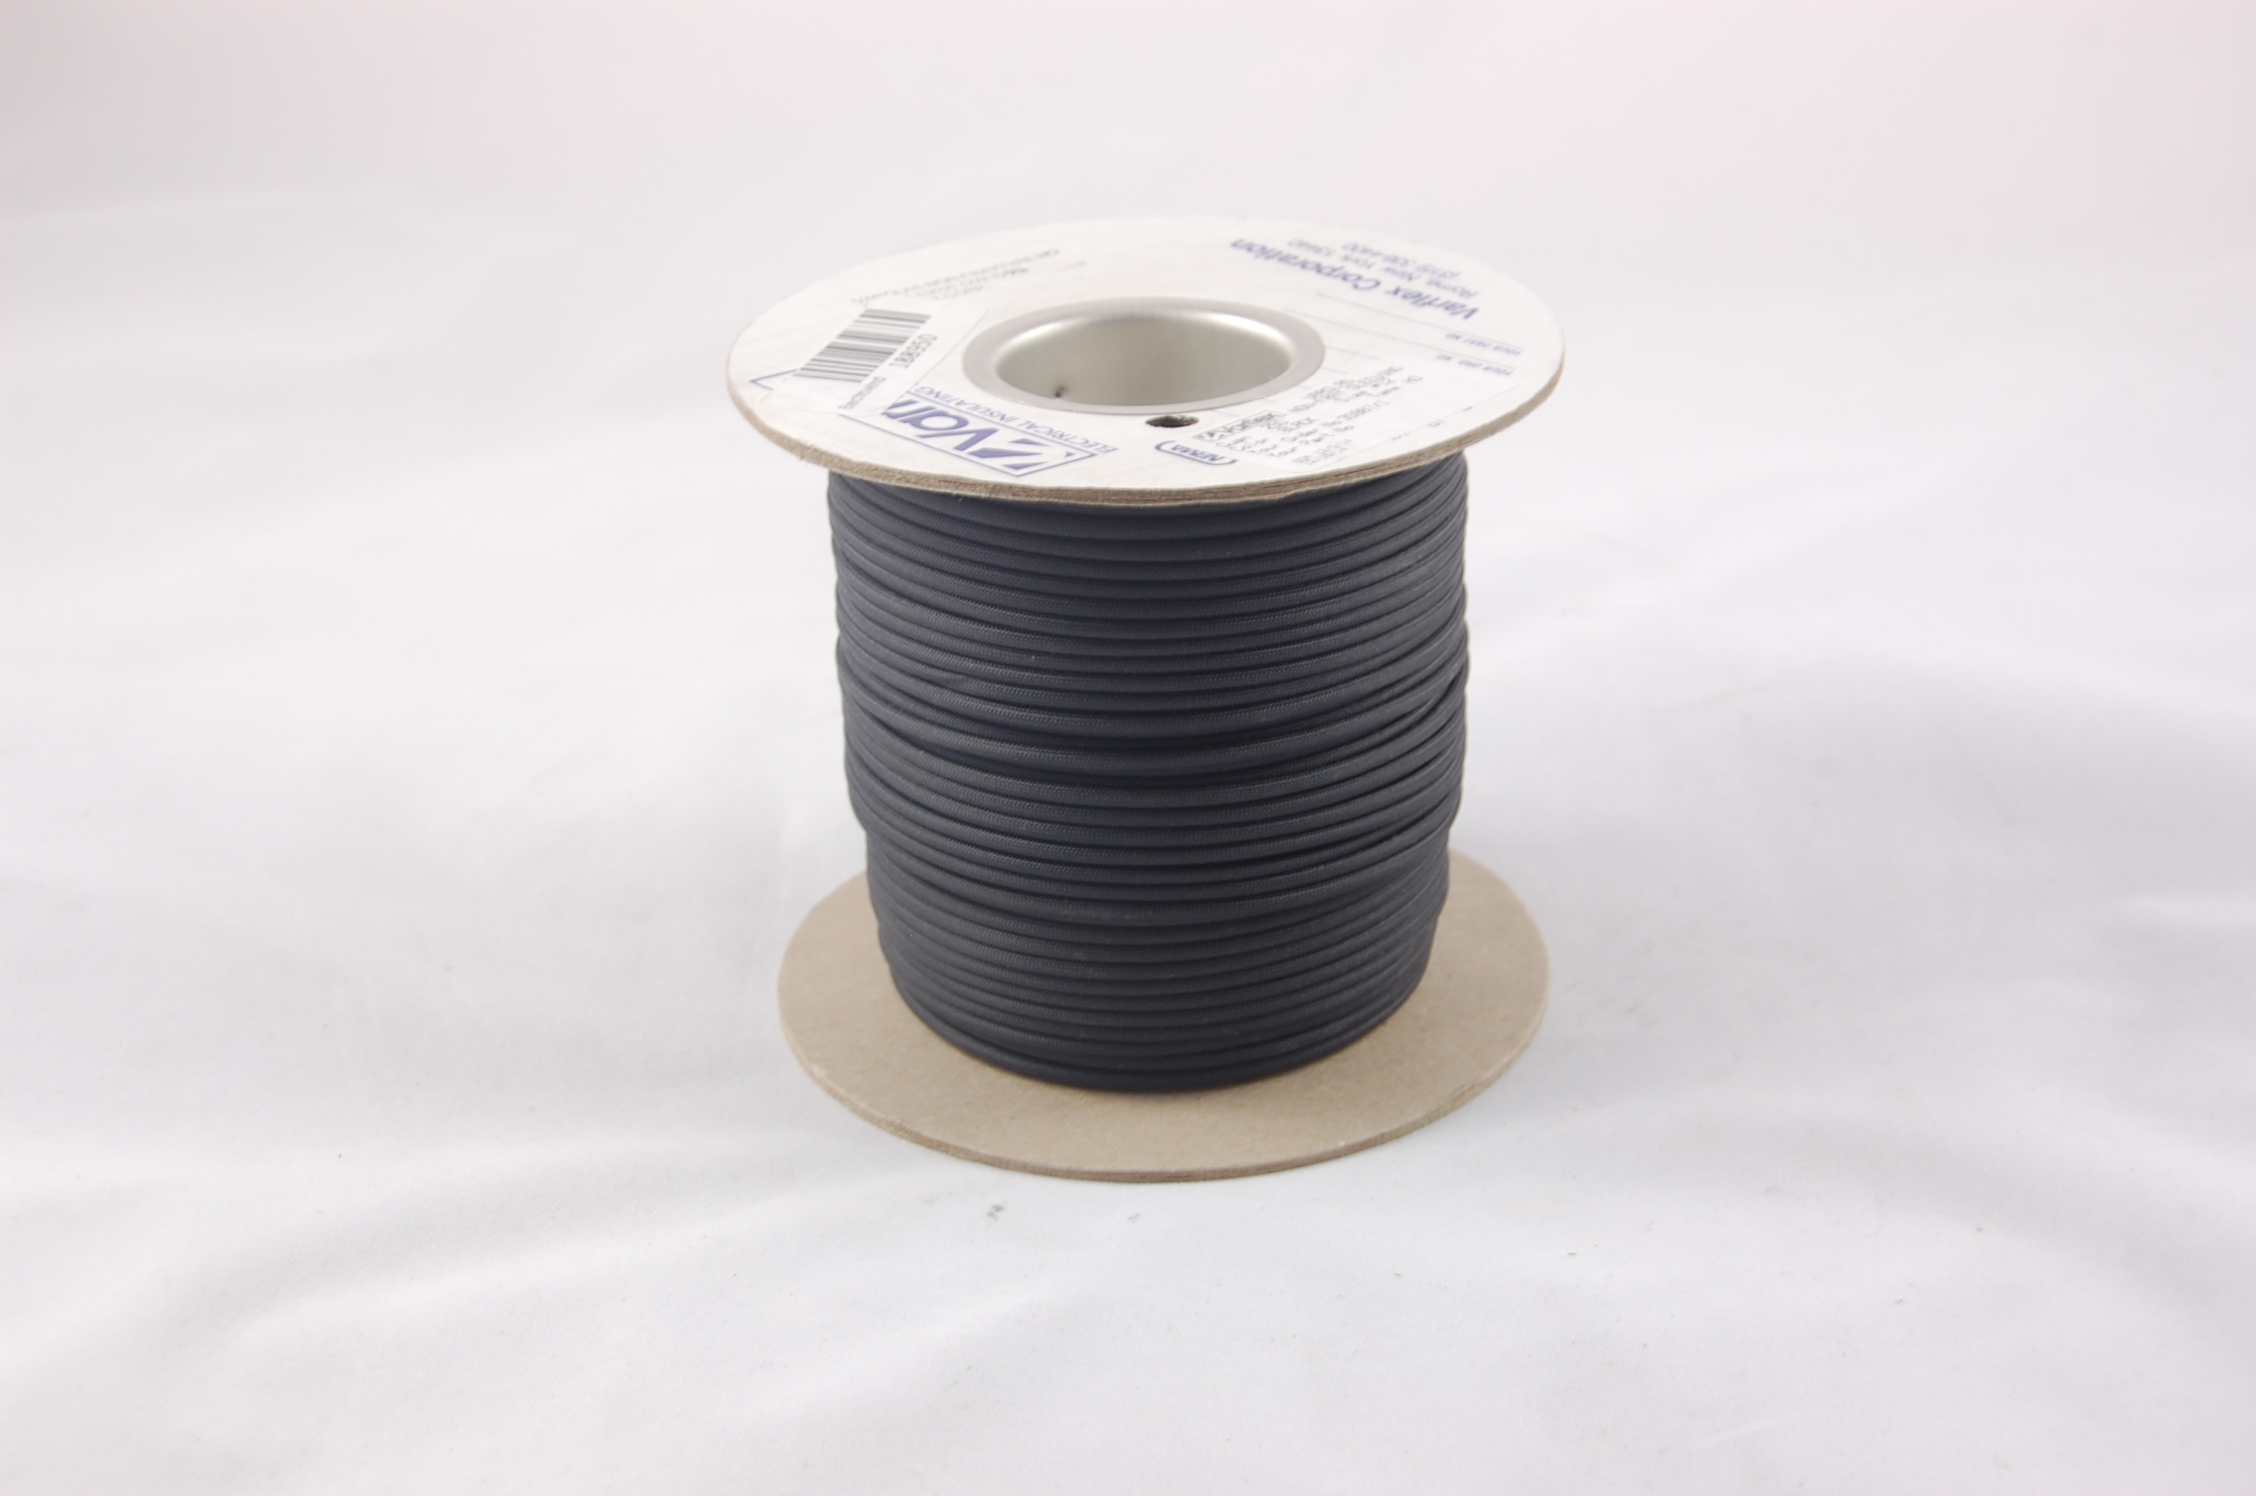 #1 AWG Varglas Type HO Heat-Cleaned and Treated High Temperature Non-Fray Flexible Fiberglass Sleeving , black, 150 FT per spool